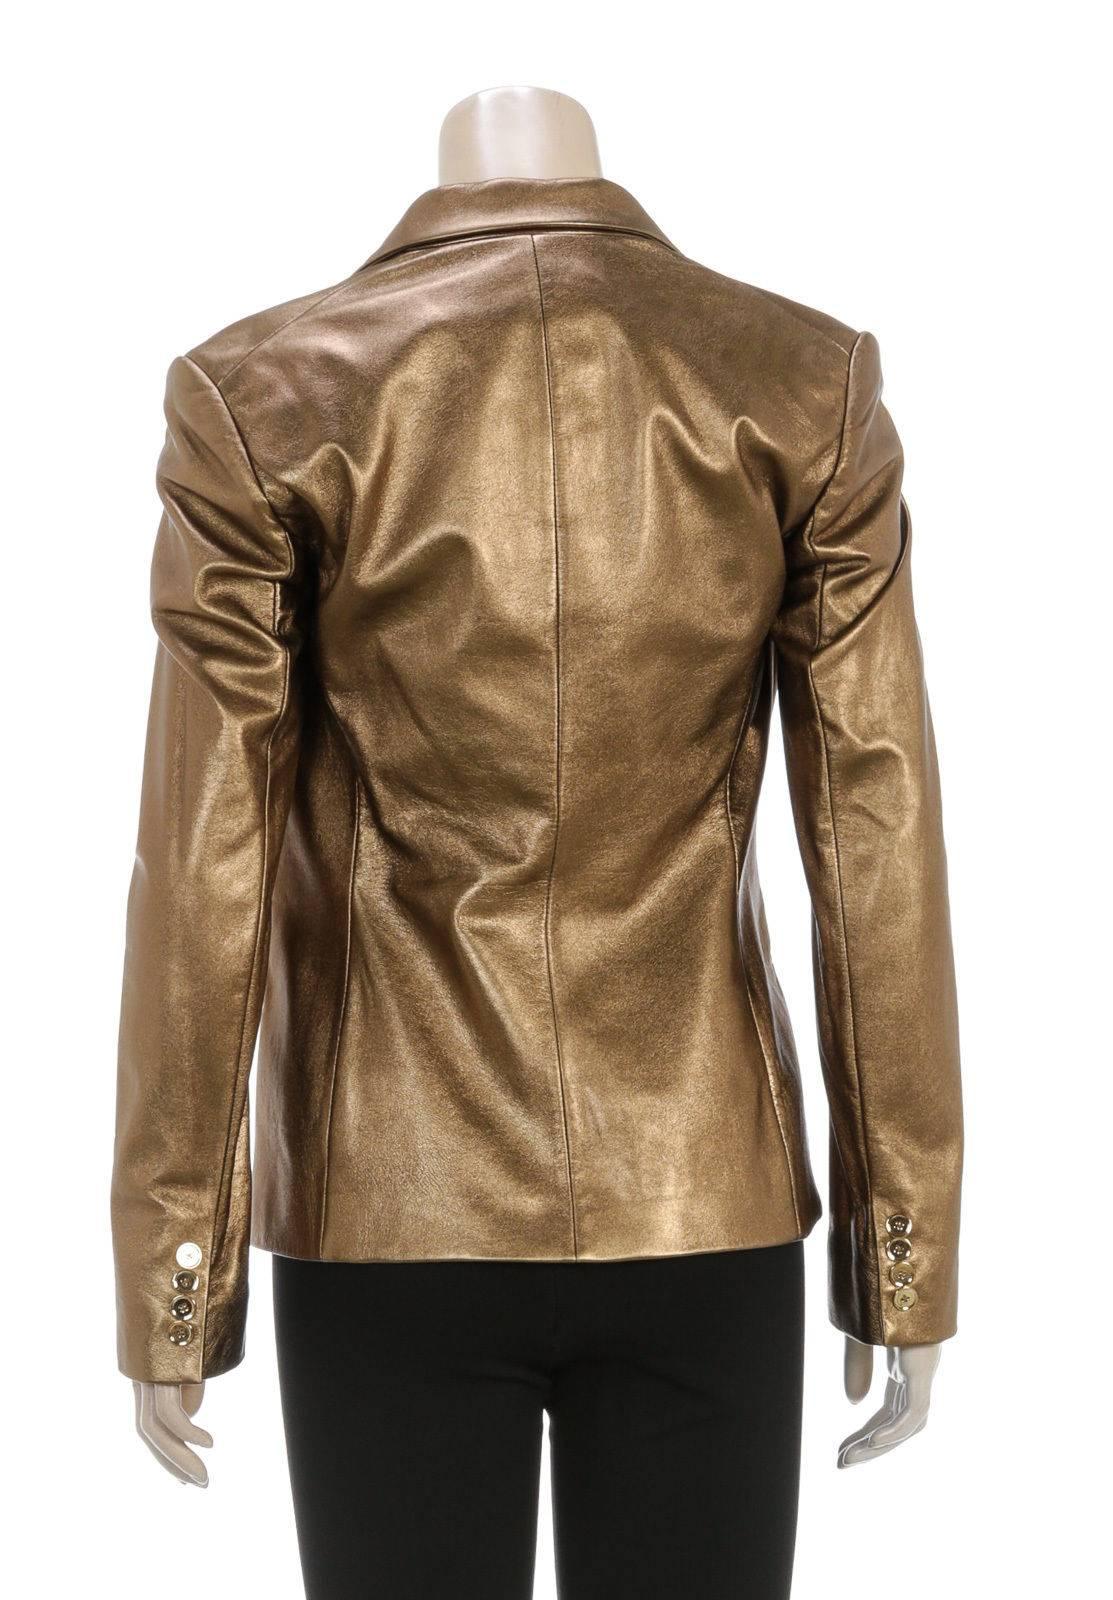 Ralph Lauren Gold Leather One Button Jacket (Size 4) NEW For Sale 1